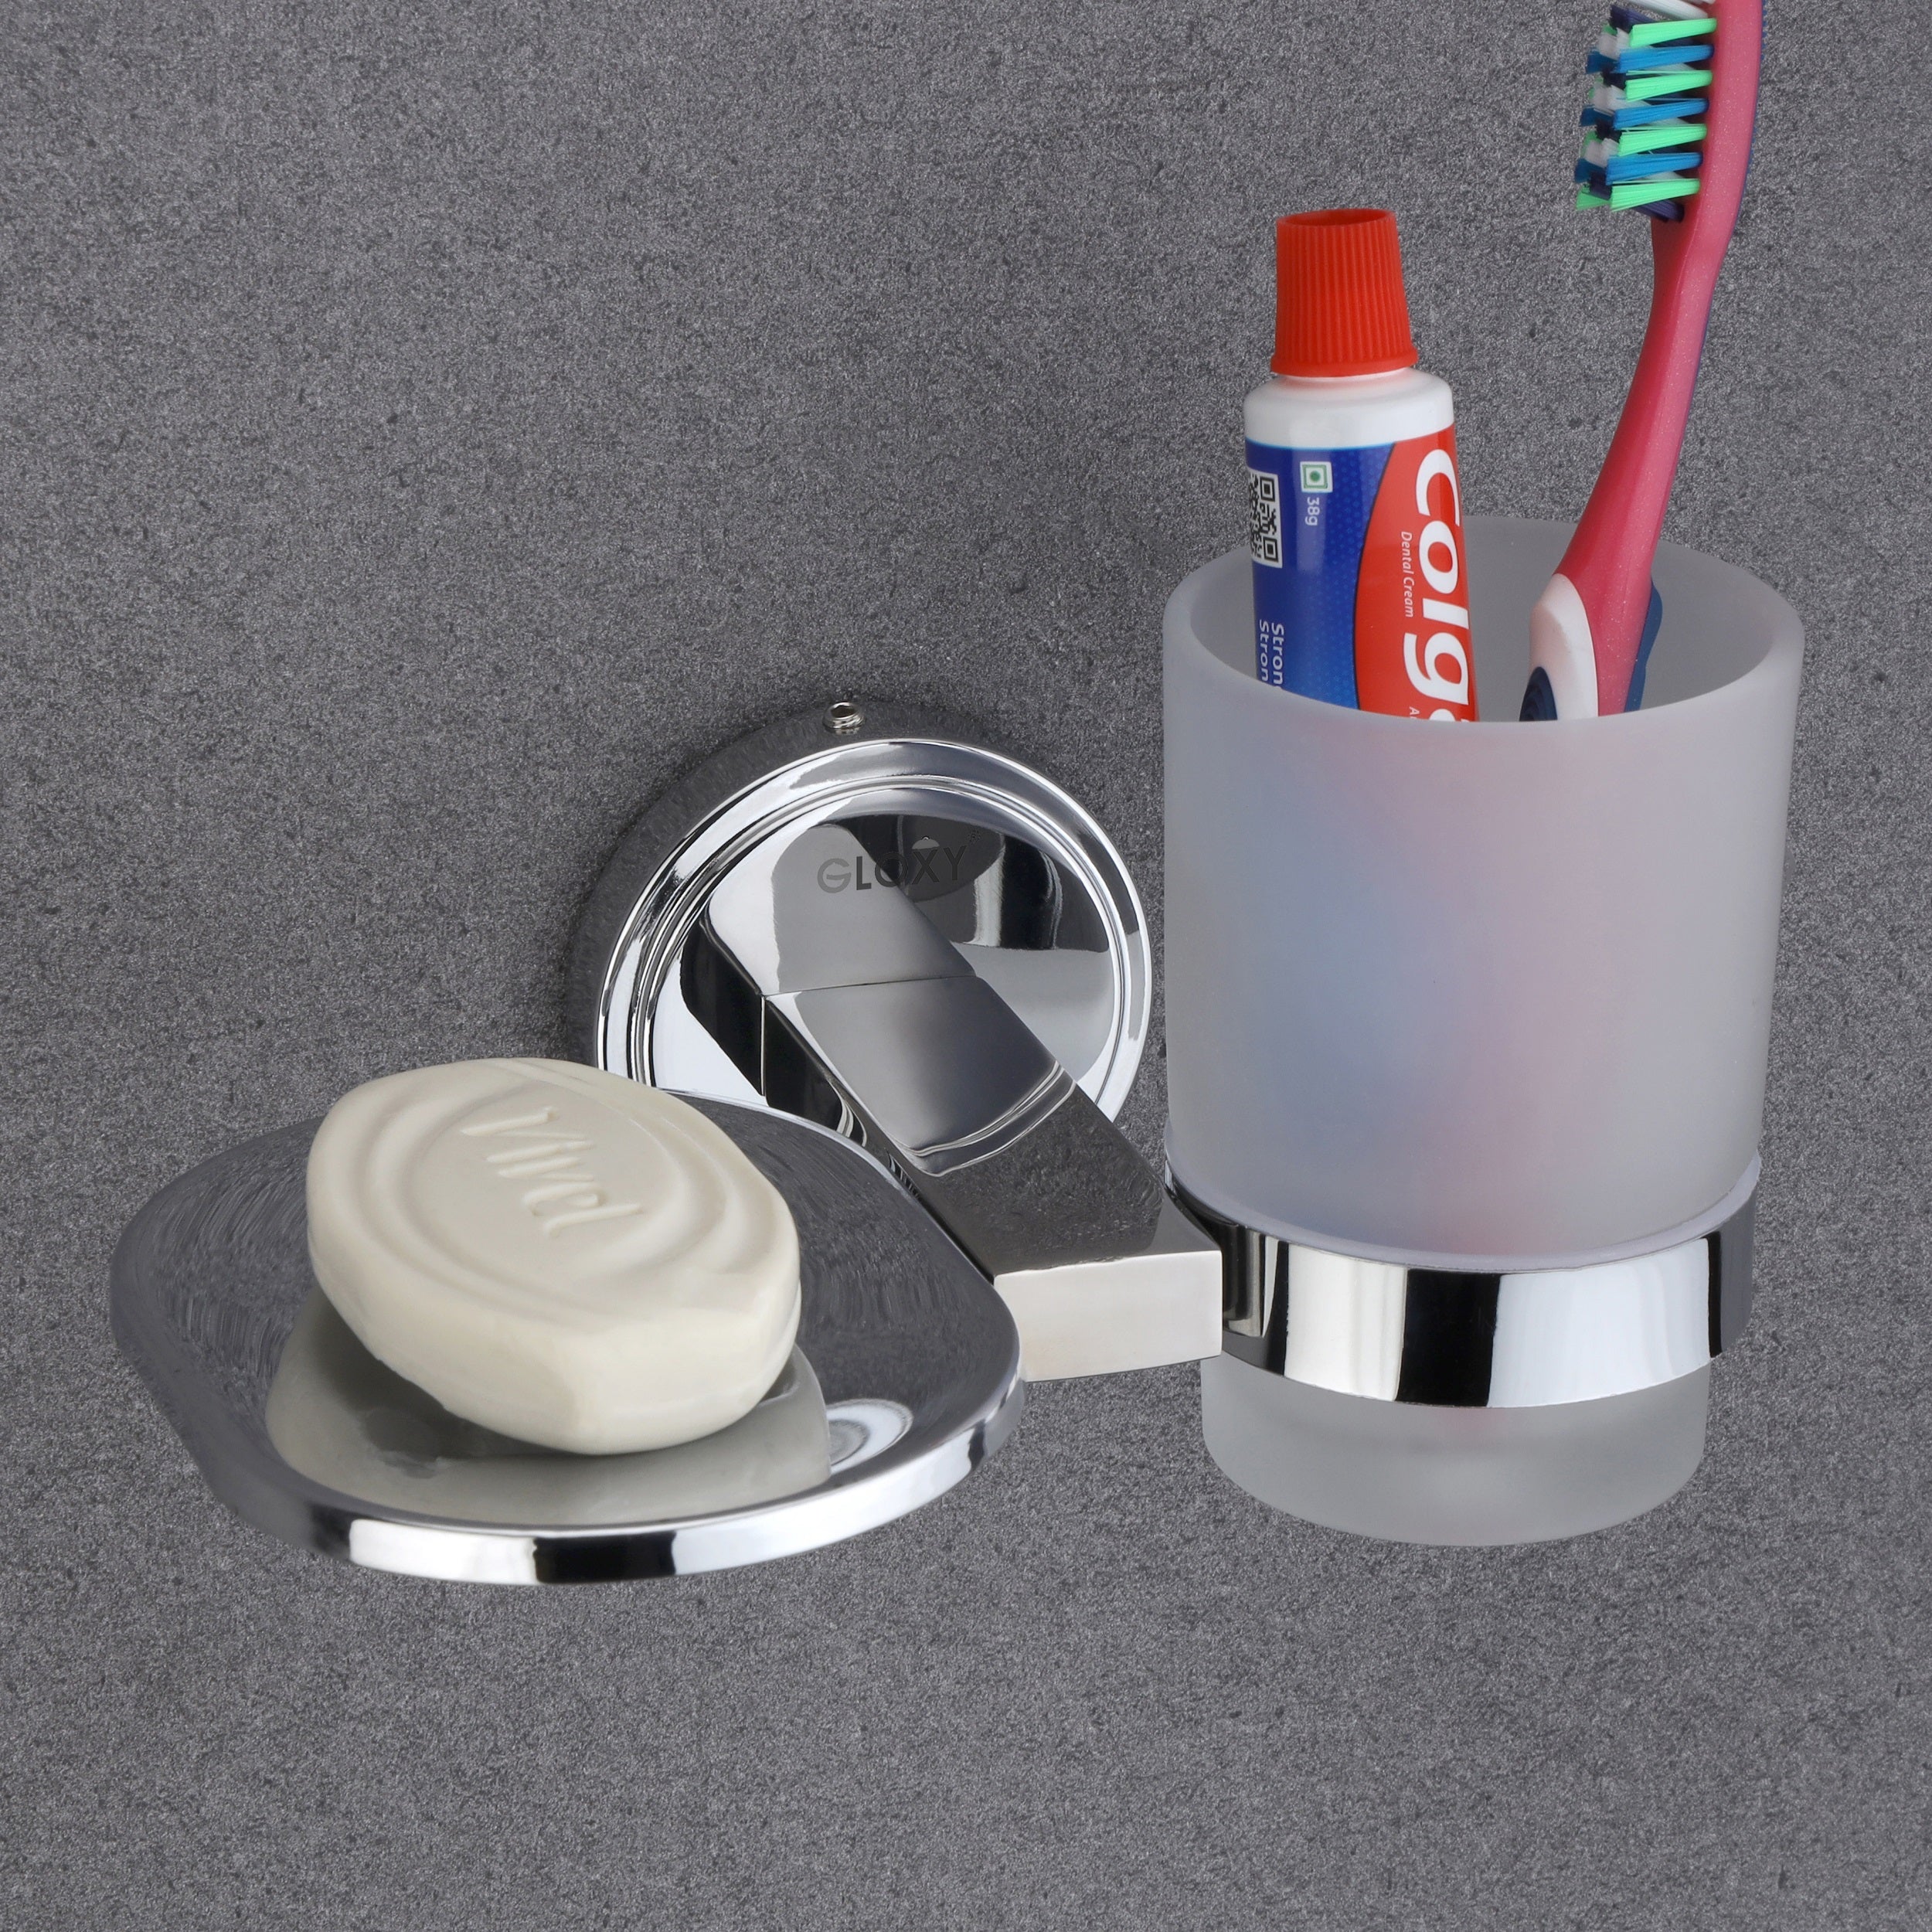 Silver Stainless Steel Soap Holder with Glass Toothbrush Holder